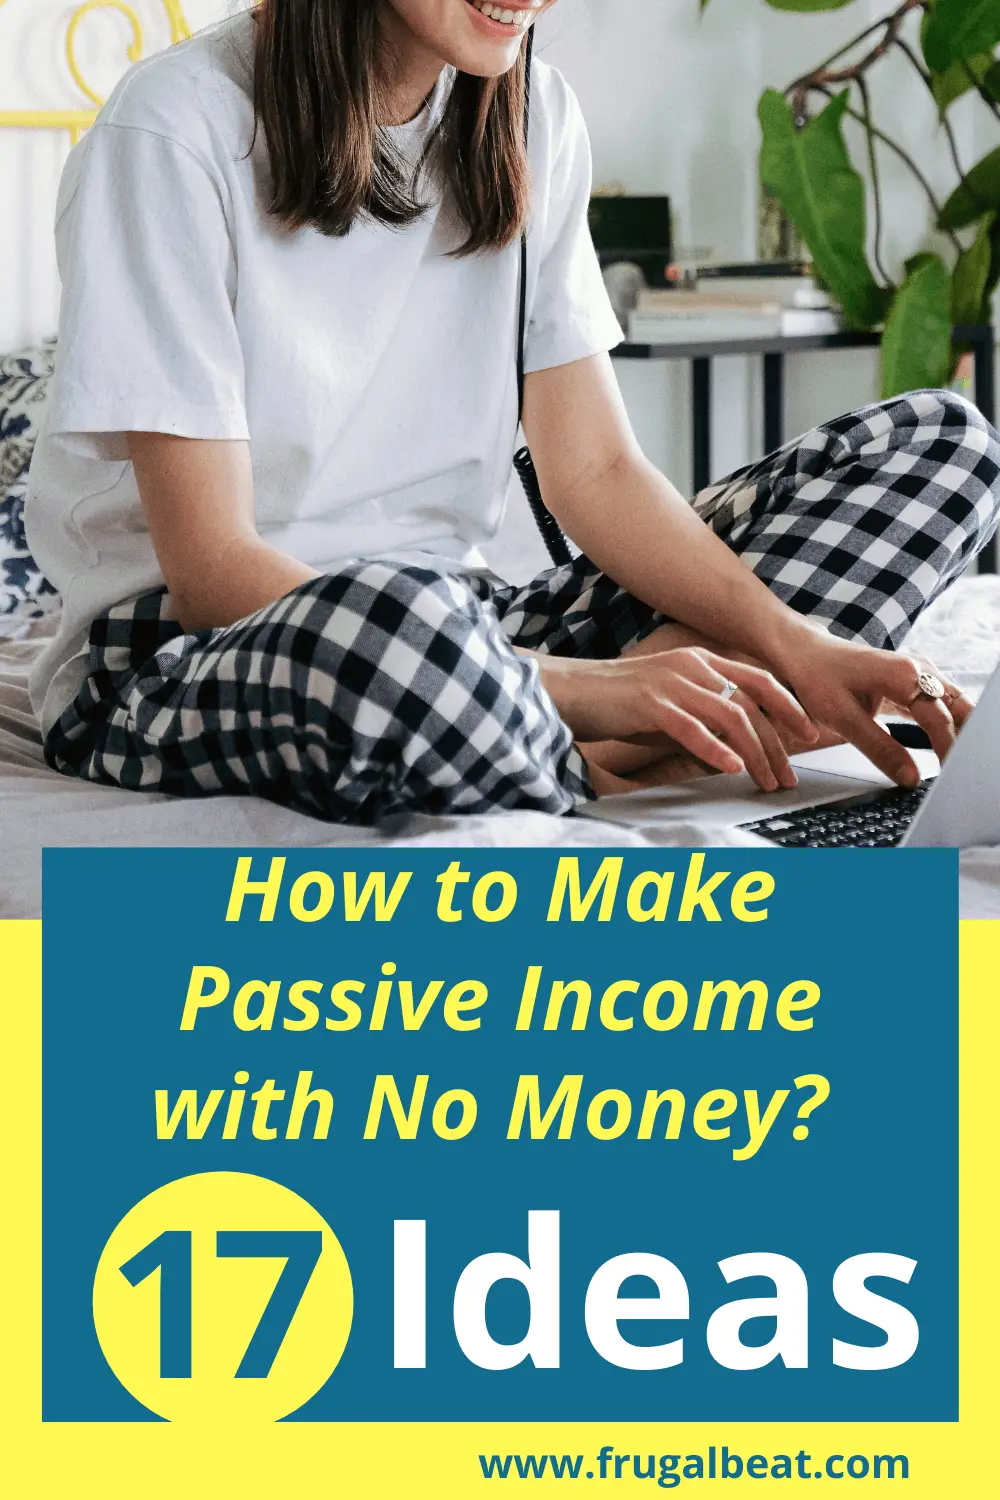 How to Make Passive Income with No Money